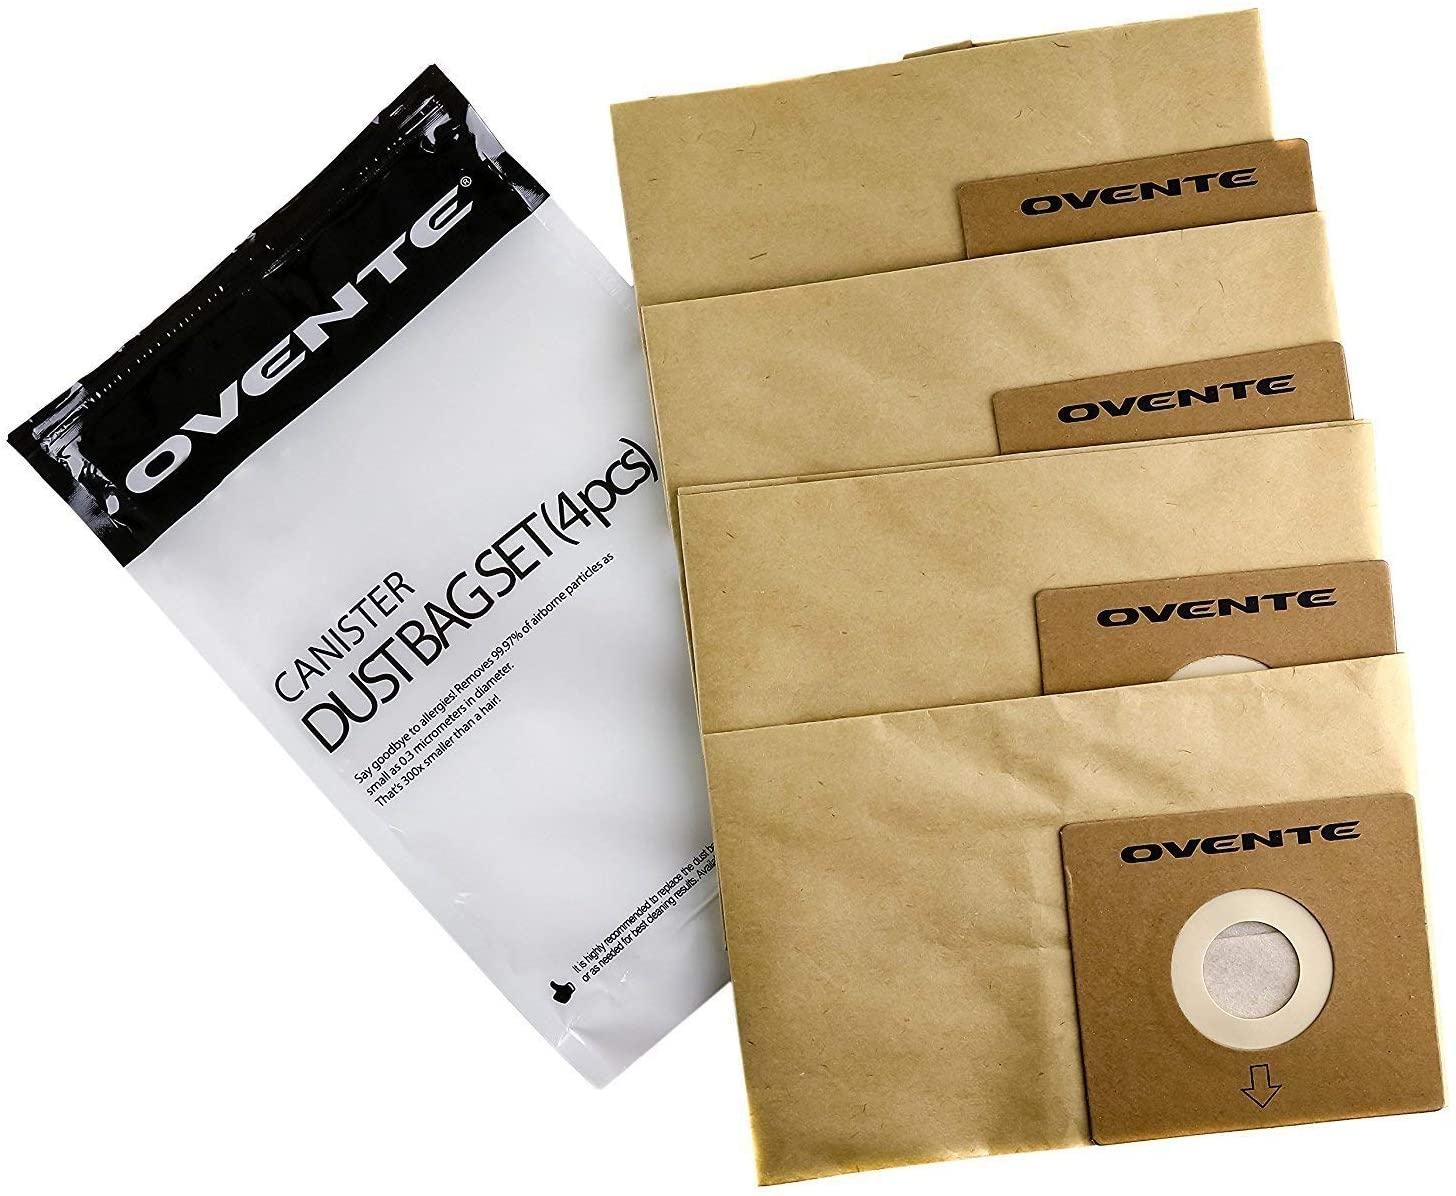 Ovente 4-Pack Premium Disposable Compact Dust Bag Replacement with Ultra Filtration, Fit for ST1600 Canister Vacuum Cleaner Model Series Large Size and Easy Storage, Brown ACPST16704 - image 1 of 7